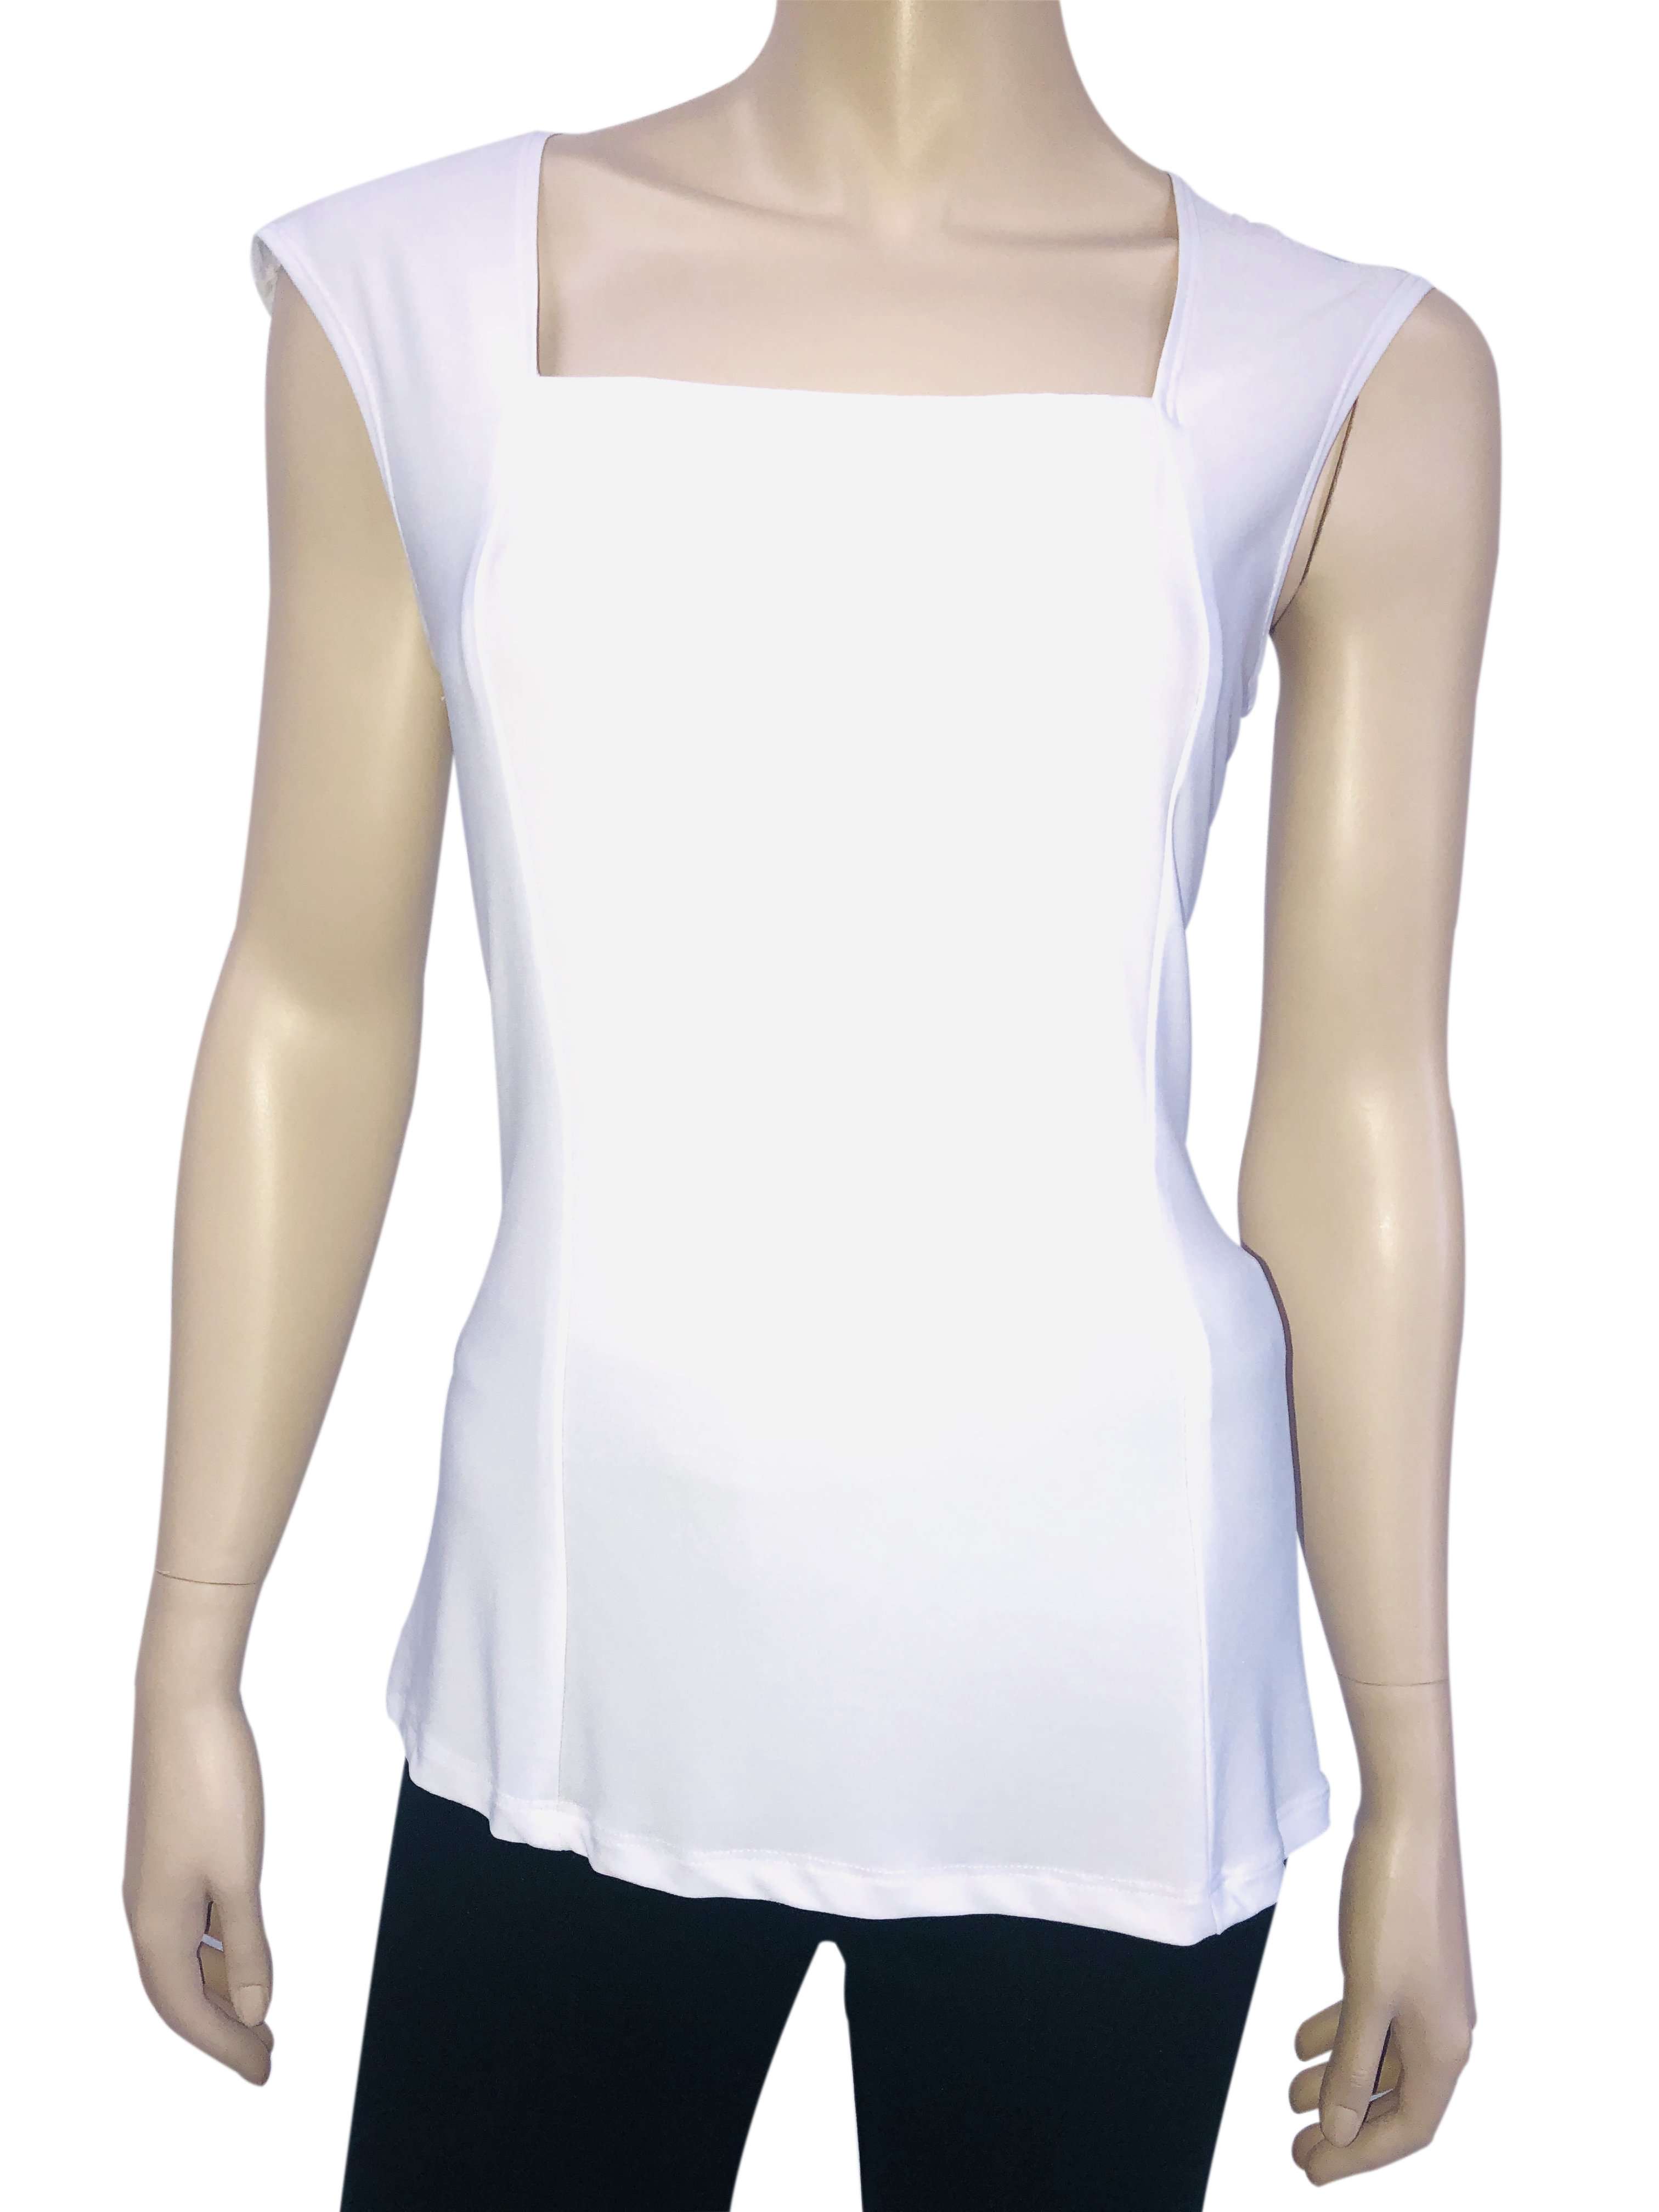 Women's White Camisole 50% Off Flattering Stretch Knit Fabric Made in Canada - Yvonne Marie - Yvonne Marie